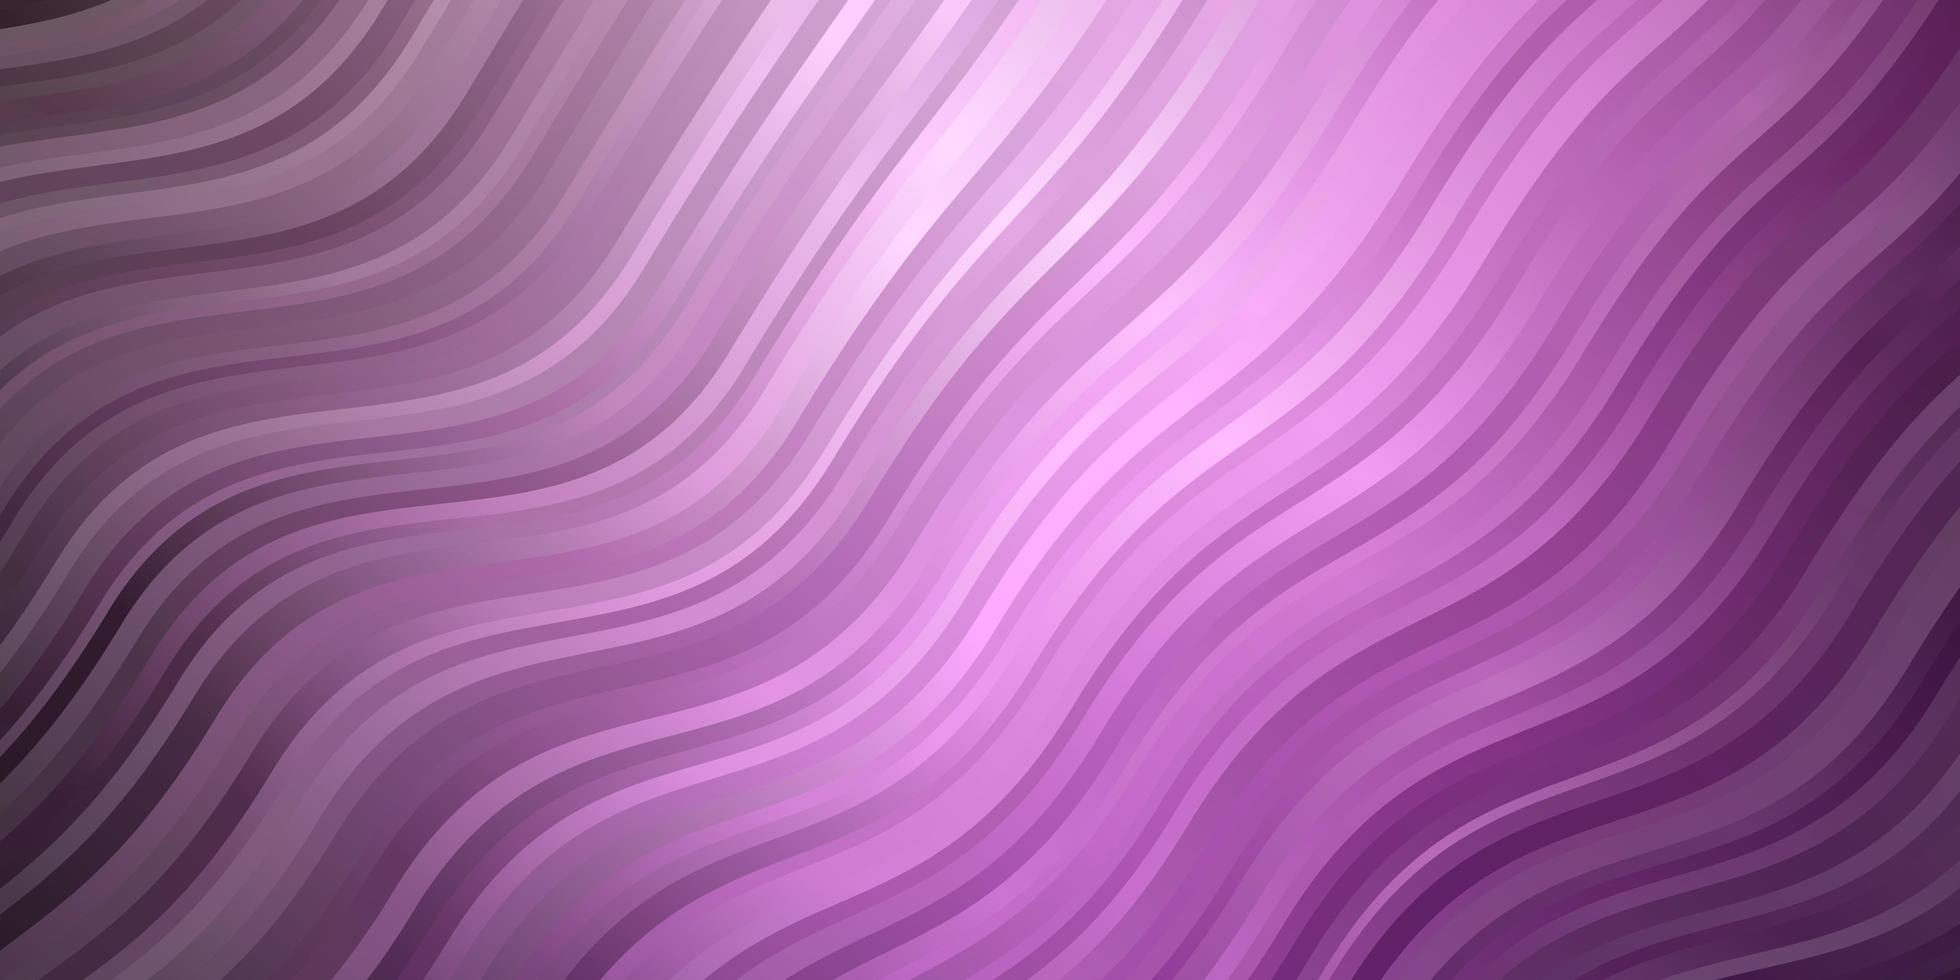 Light Purple vector template with wry lines.